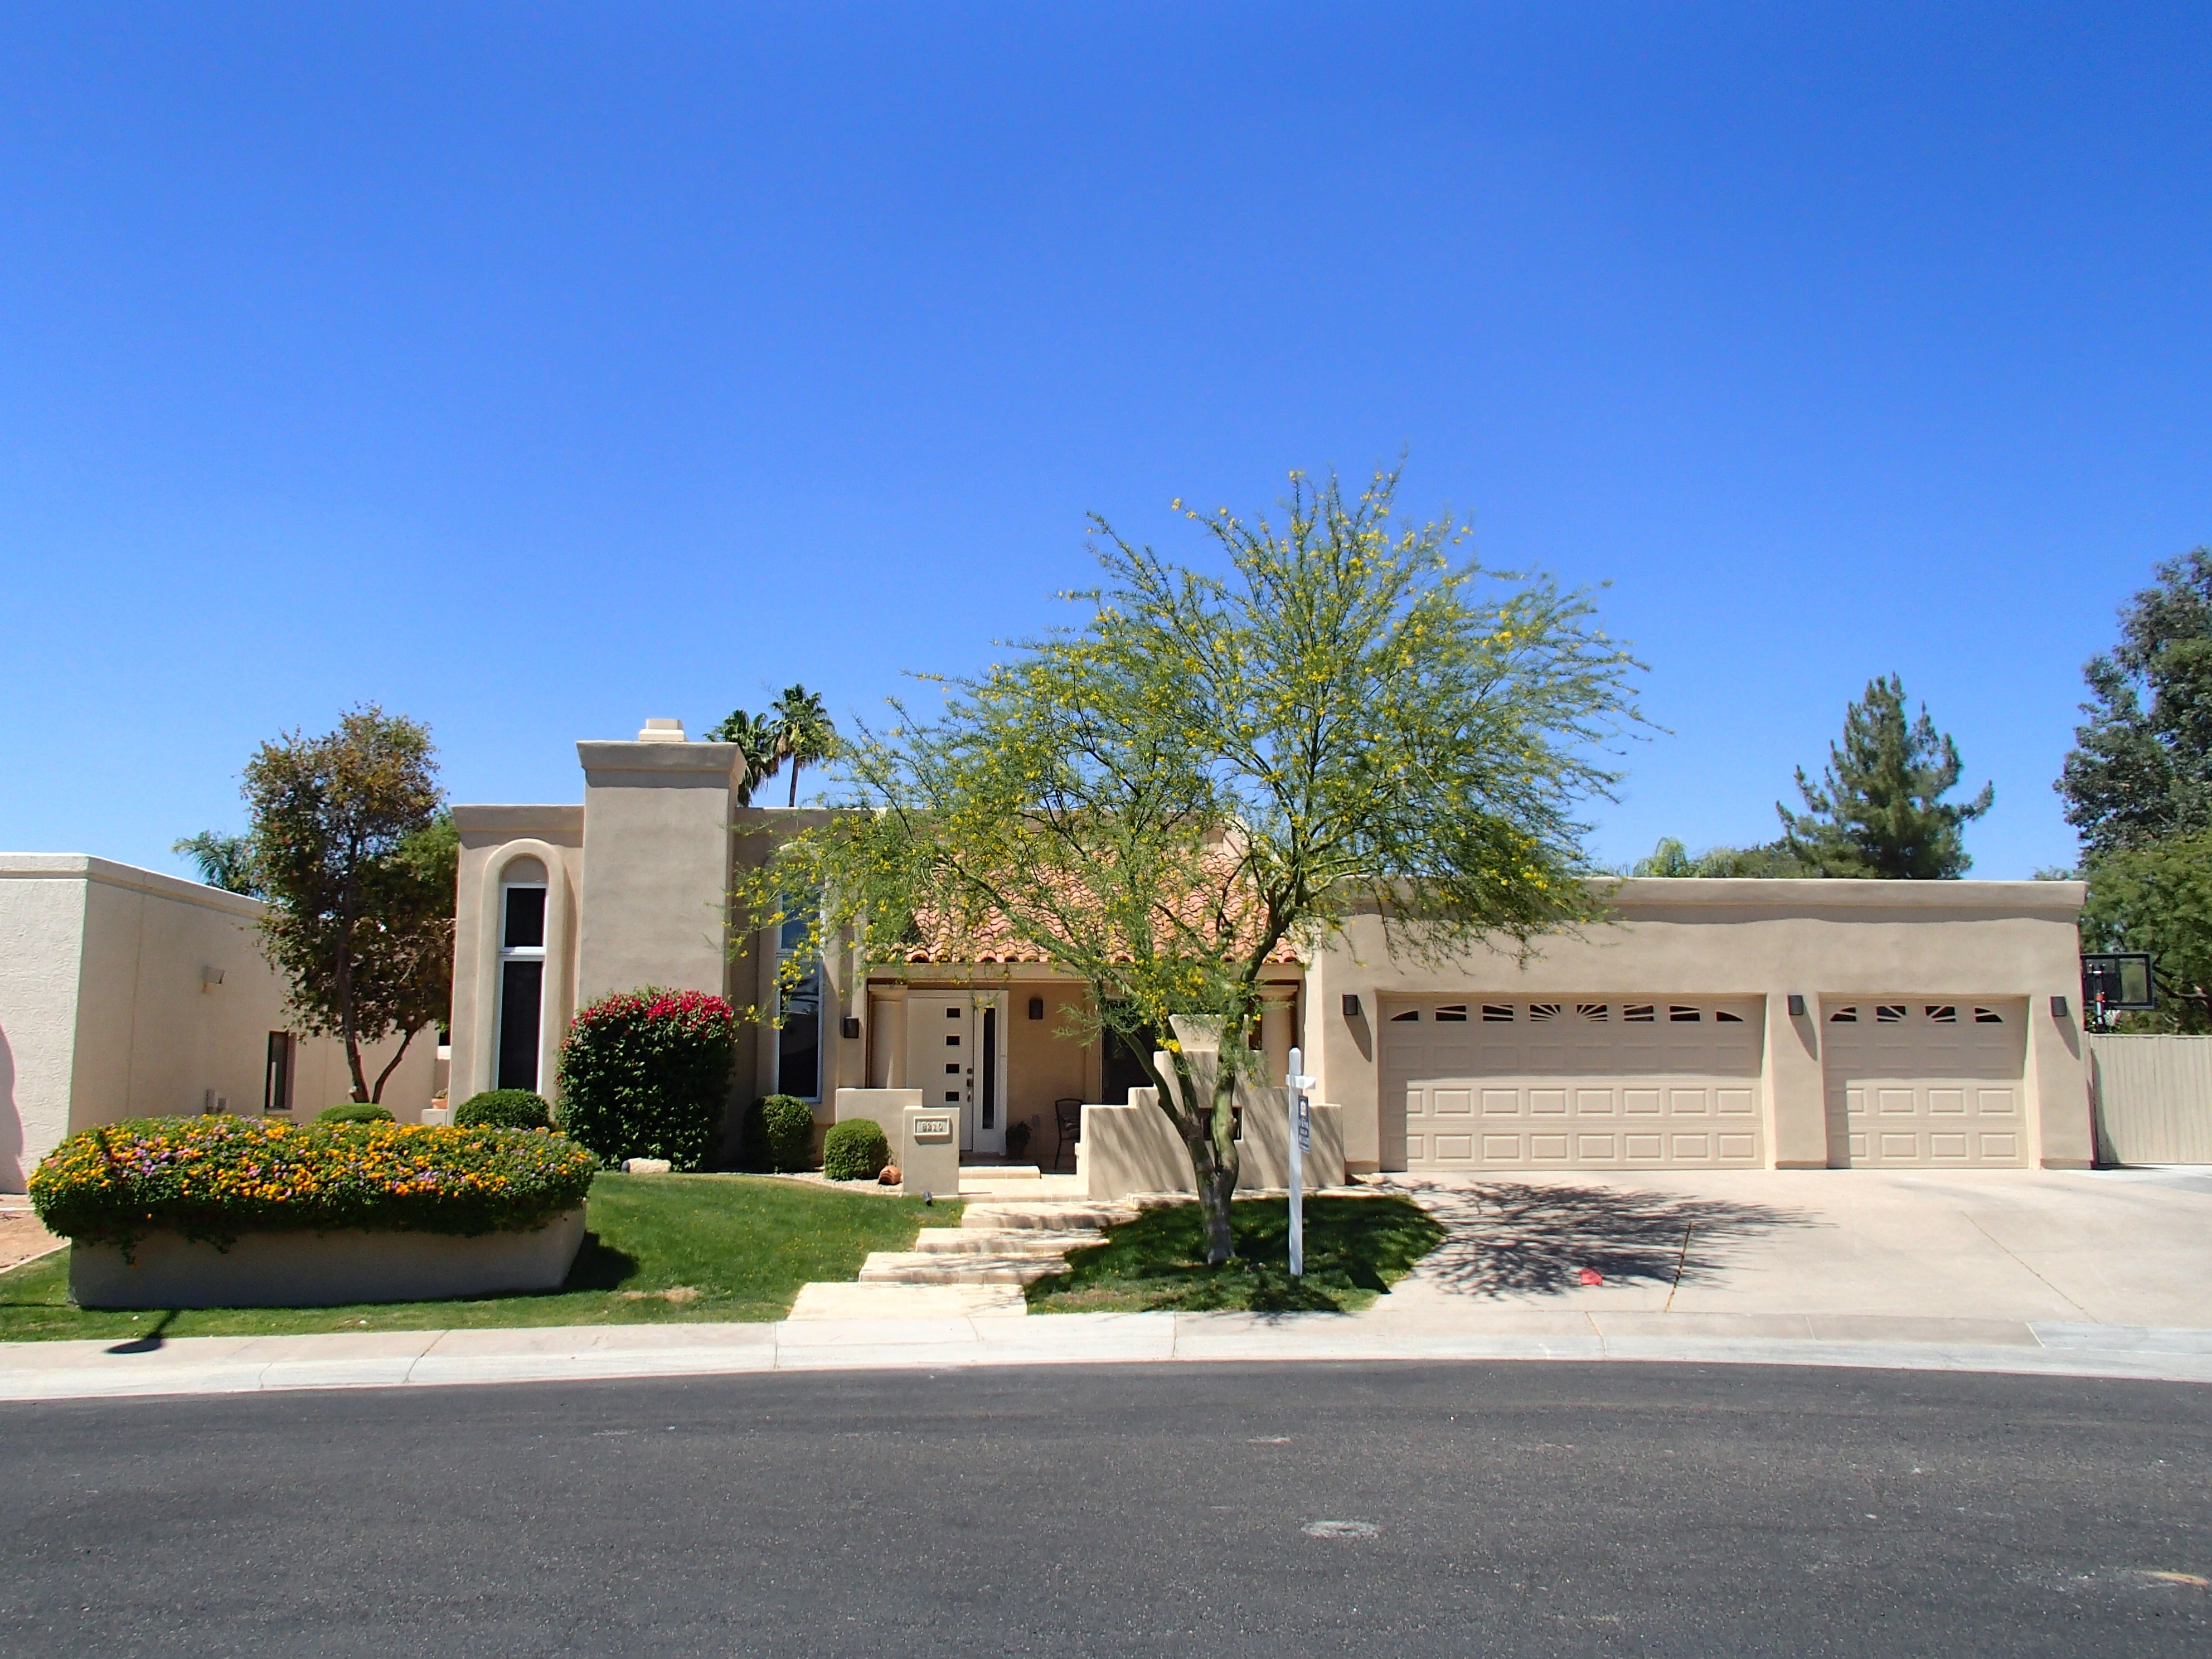 McCormick Ranch Open House 1-5 PM, 6/14 & 6/15